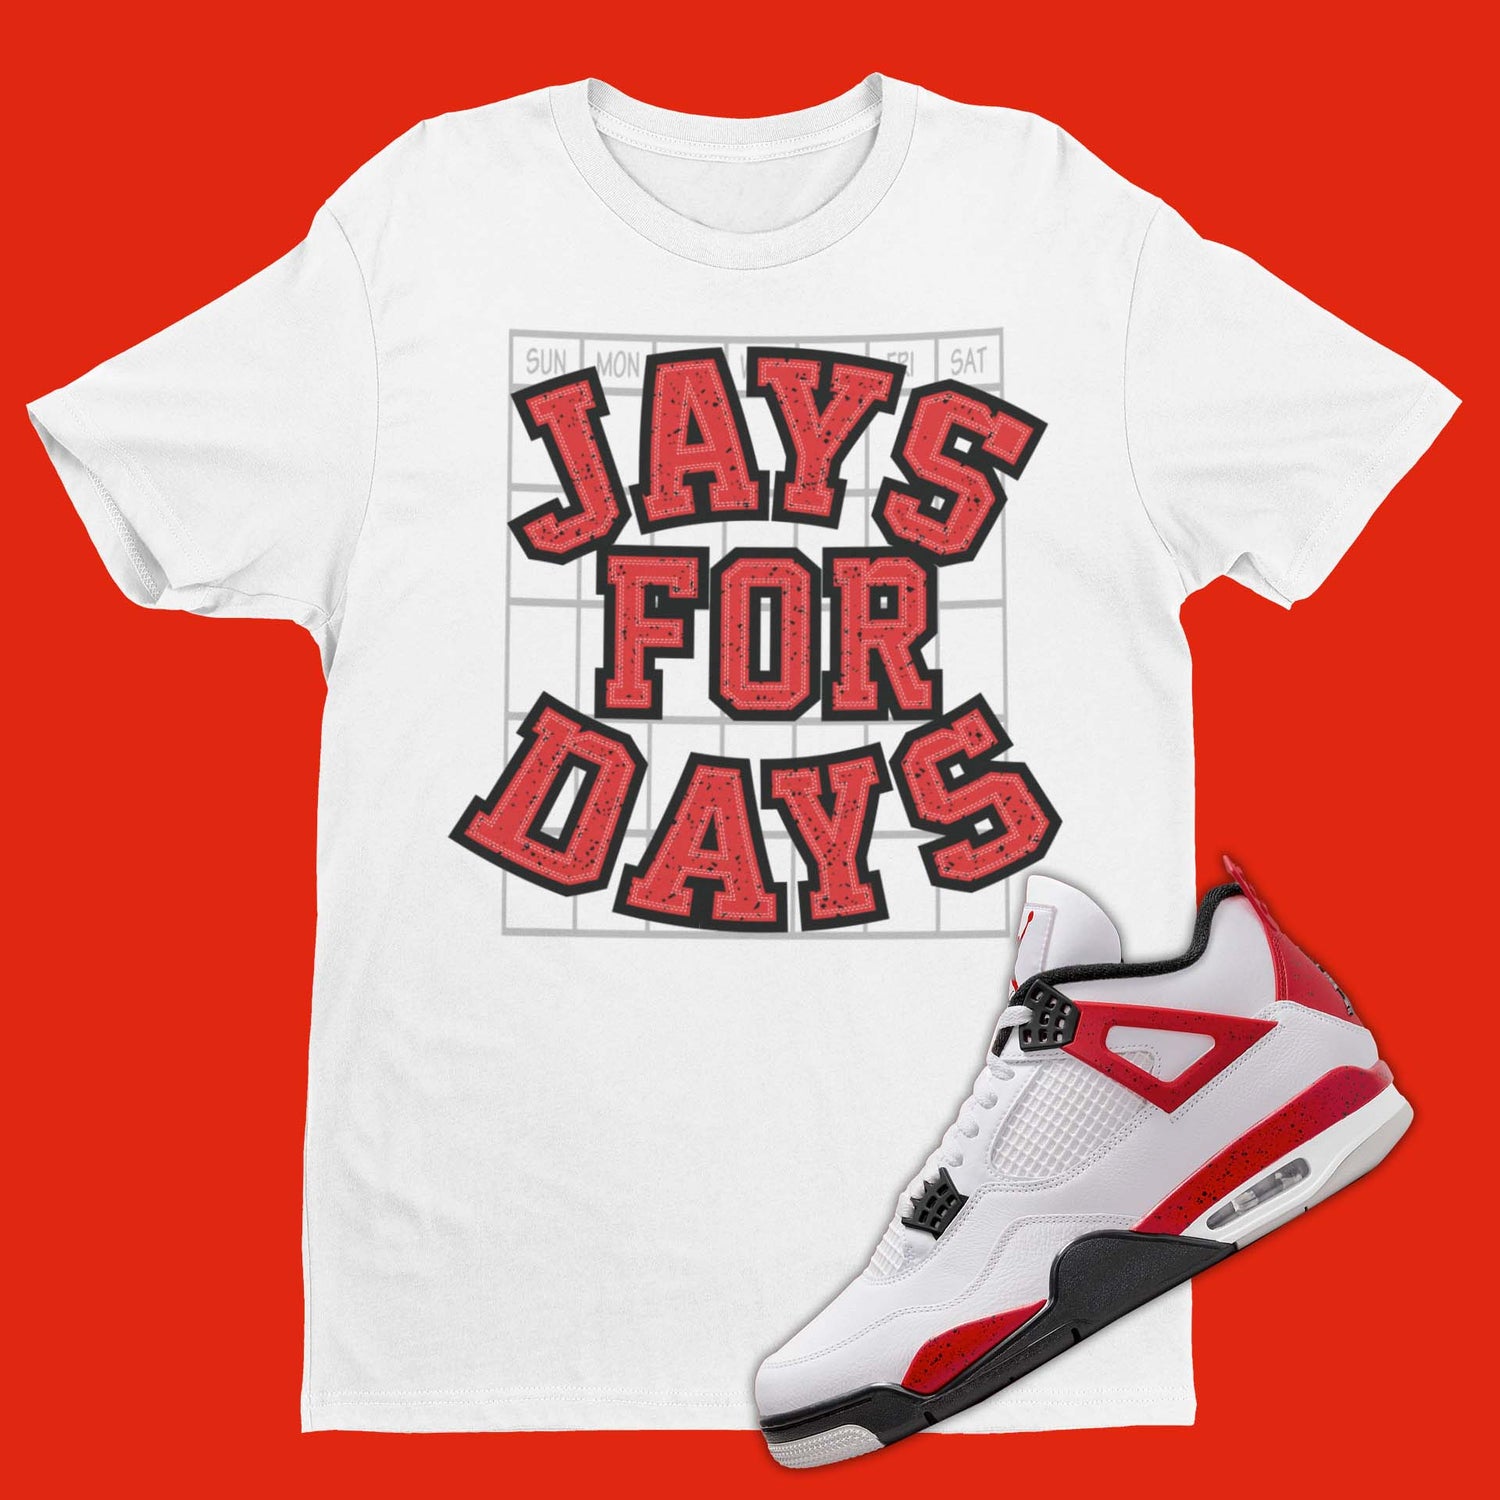 Jays For Days Air Jordan 4 Red Cement Matching T-Shirt from SNKADX